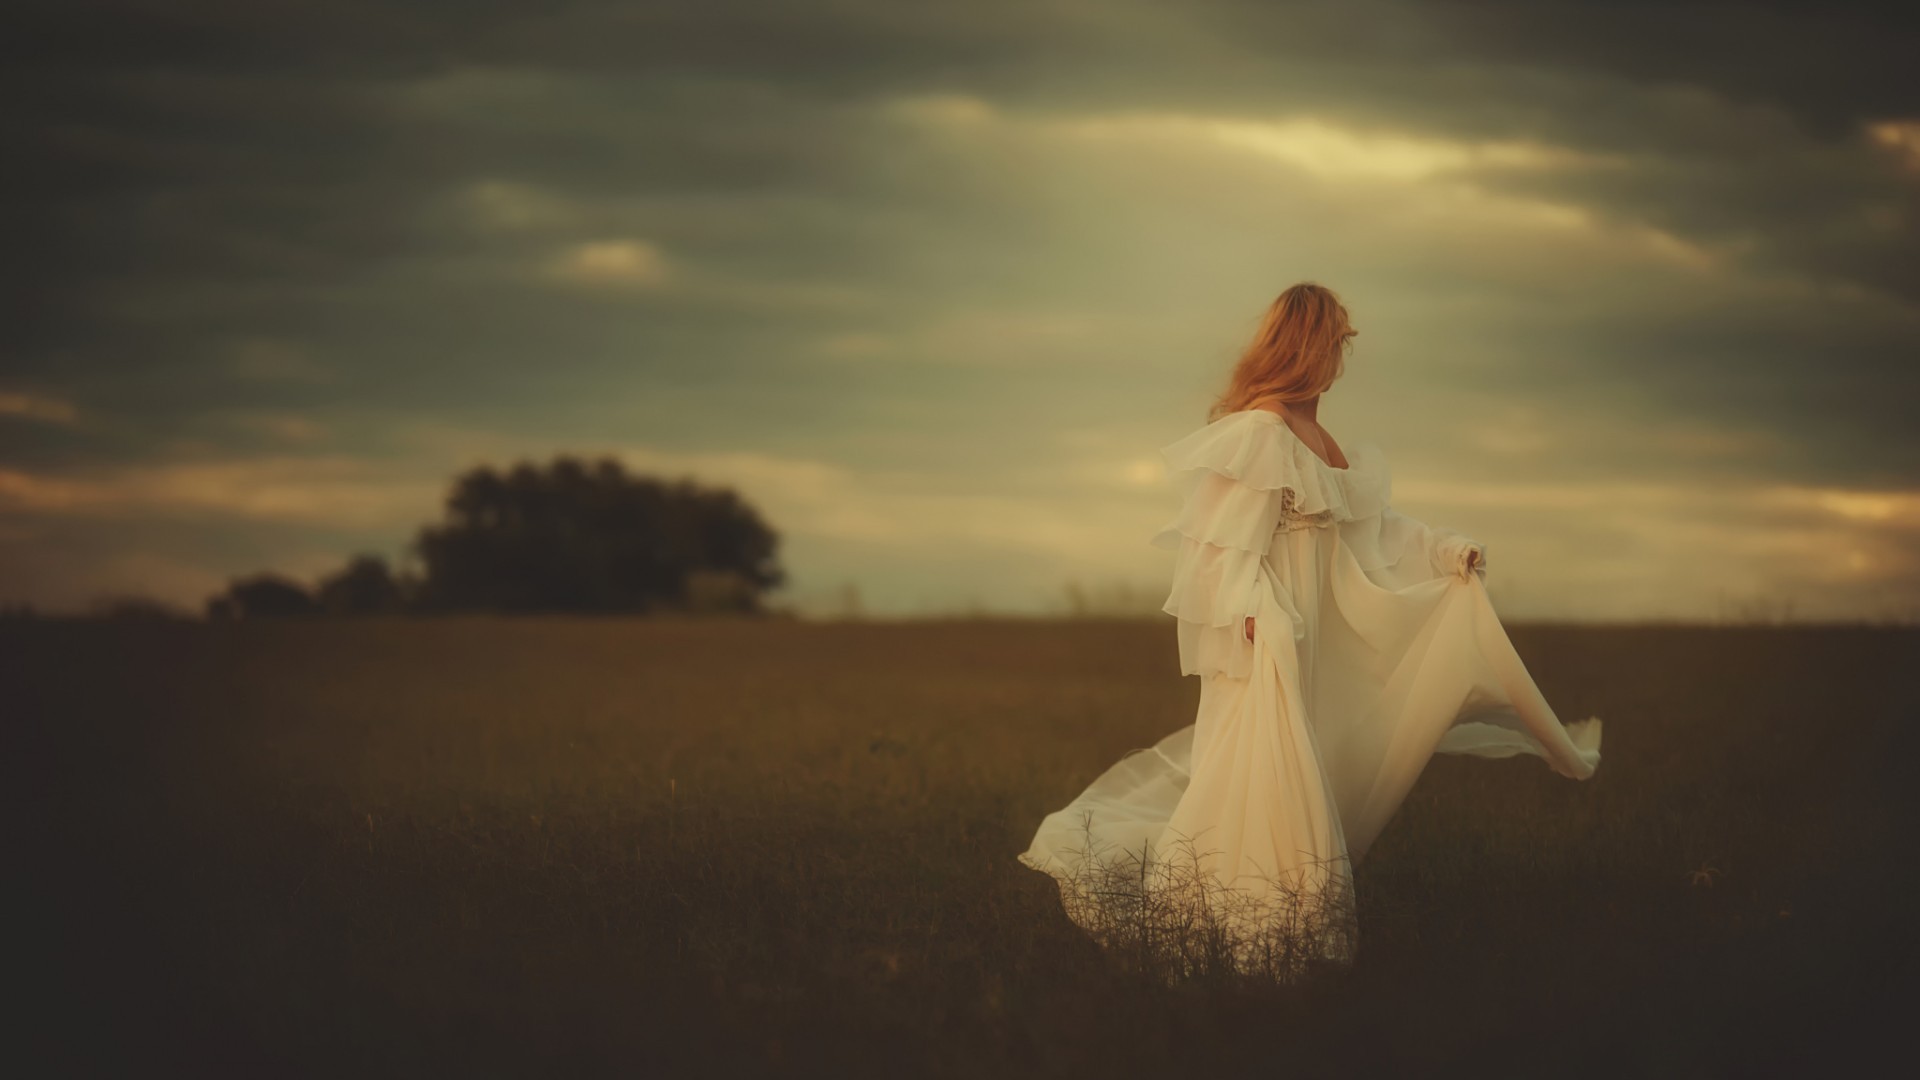 People 1920x1080 women model blonde long hair women outdoors nature trees white dress field clouds filter depth of field standing white clothing looking away TJ Drysdale